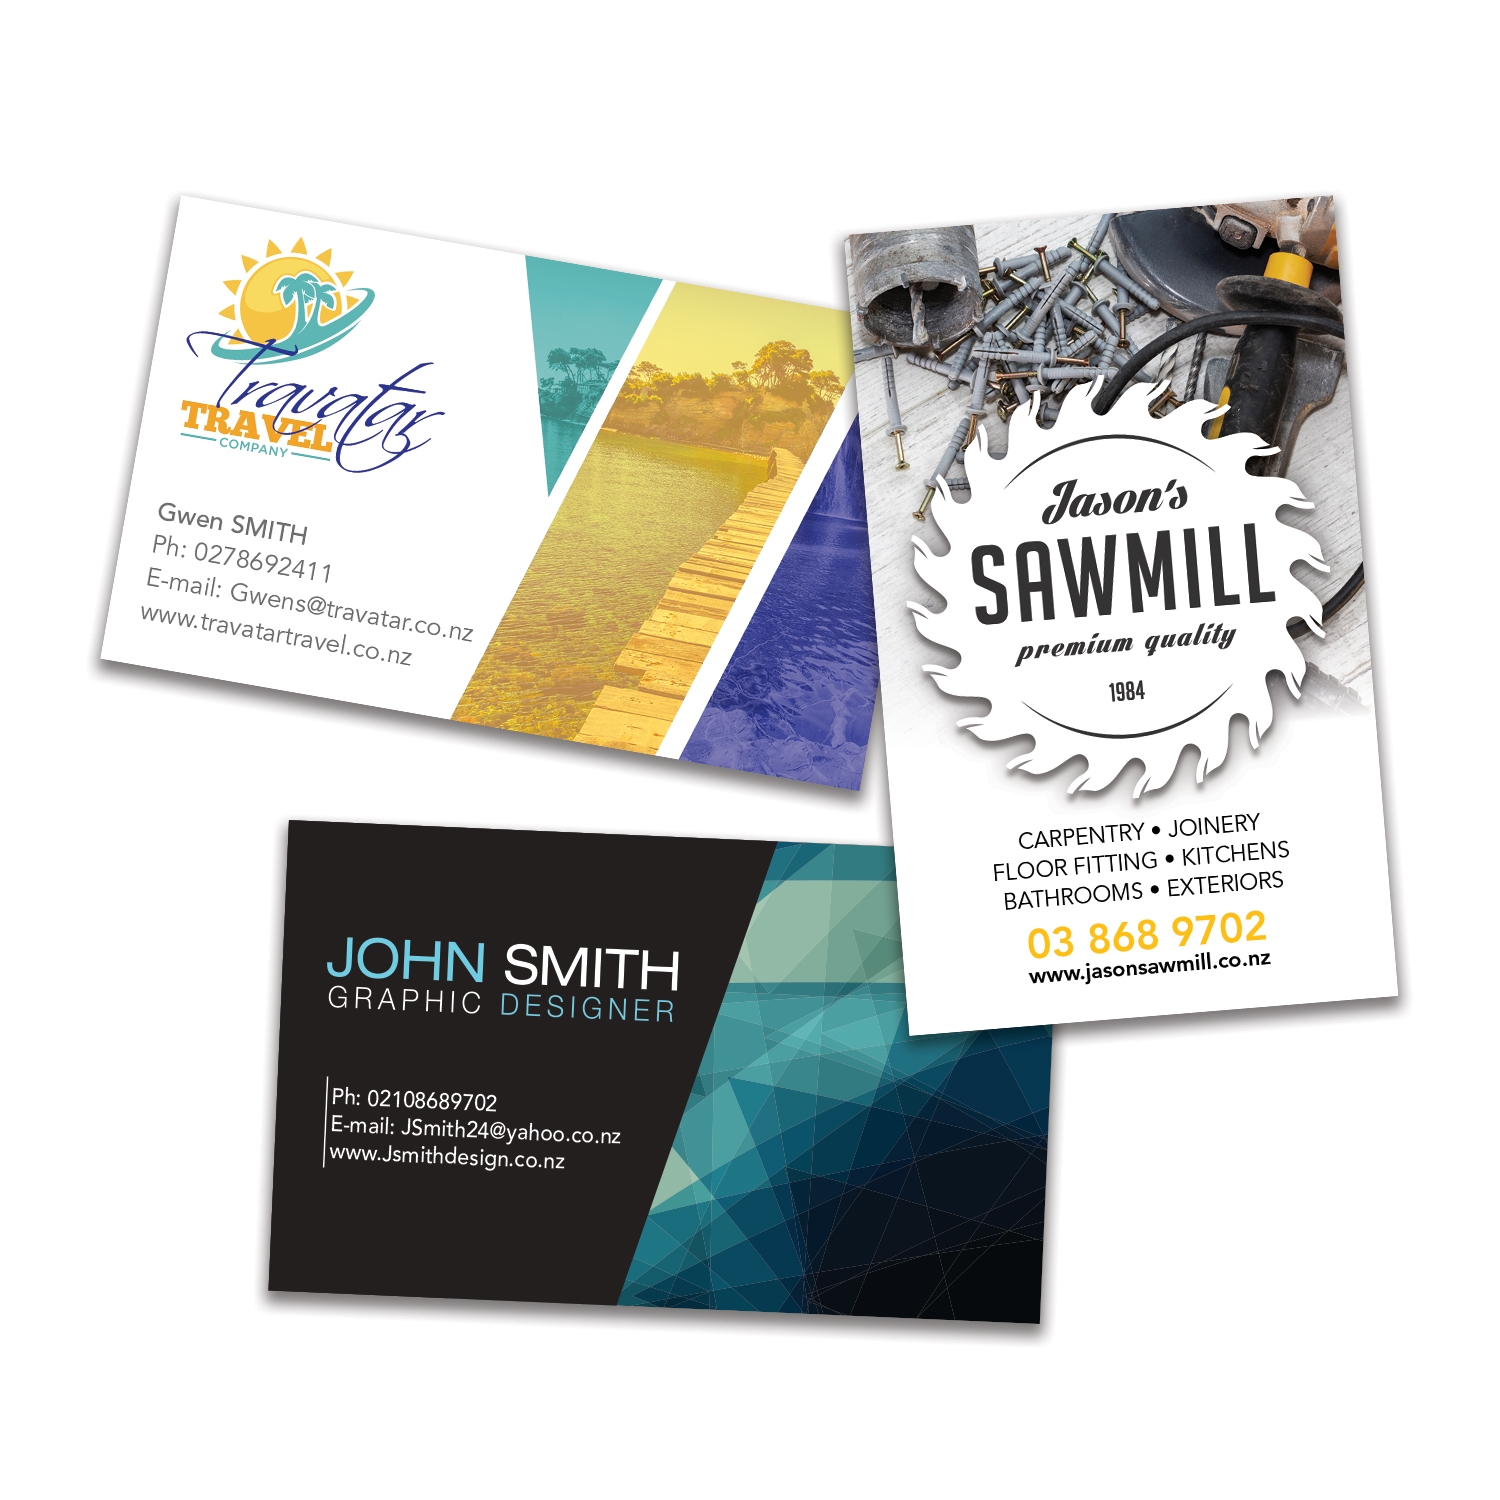 Full Colour Business Cards Image Group